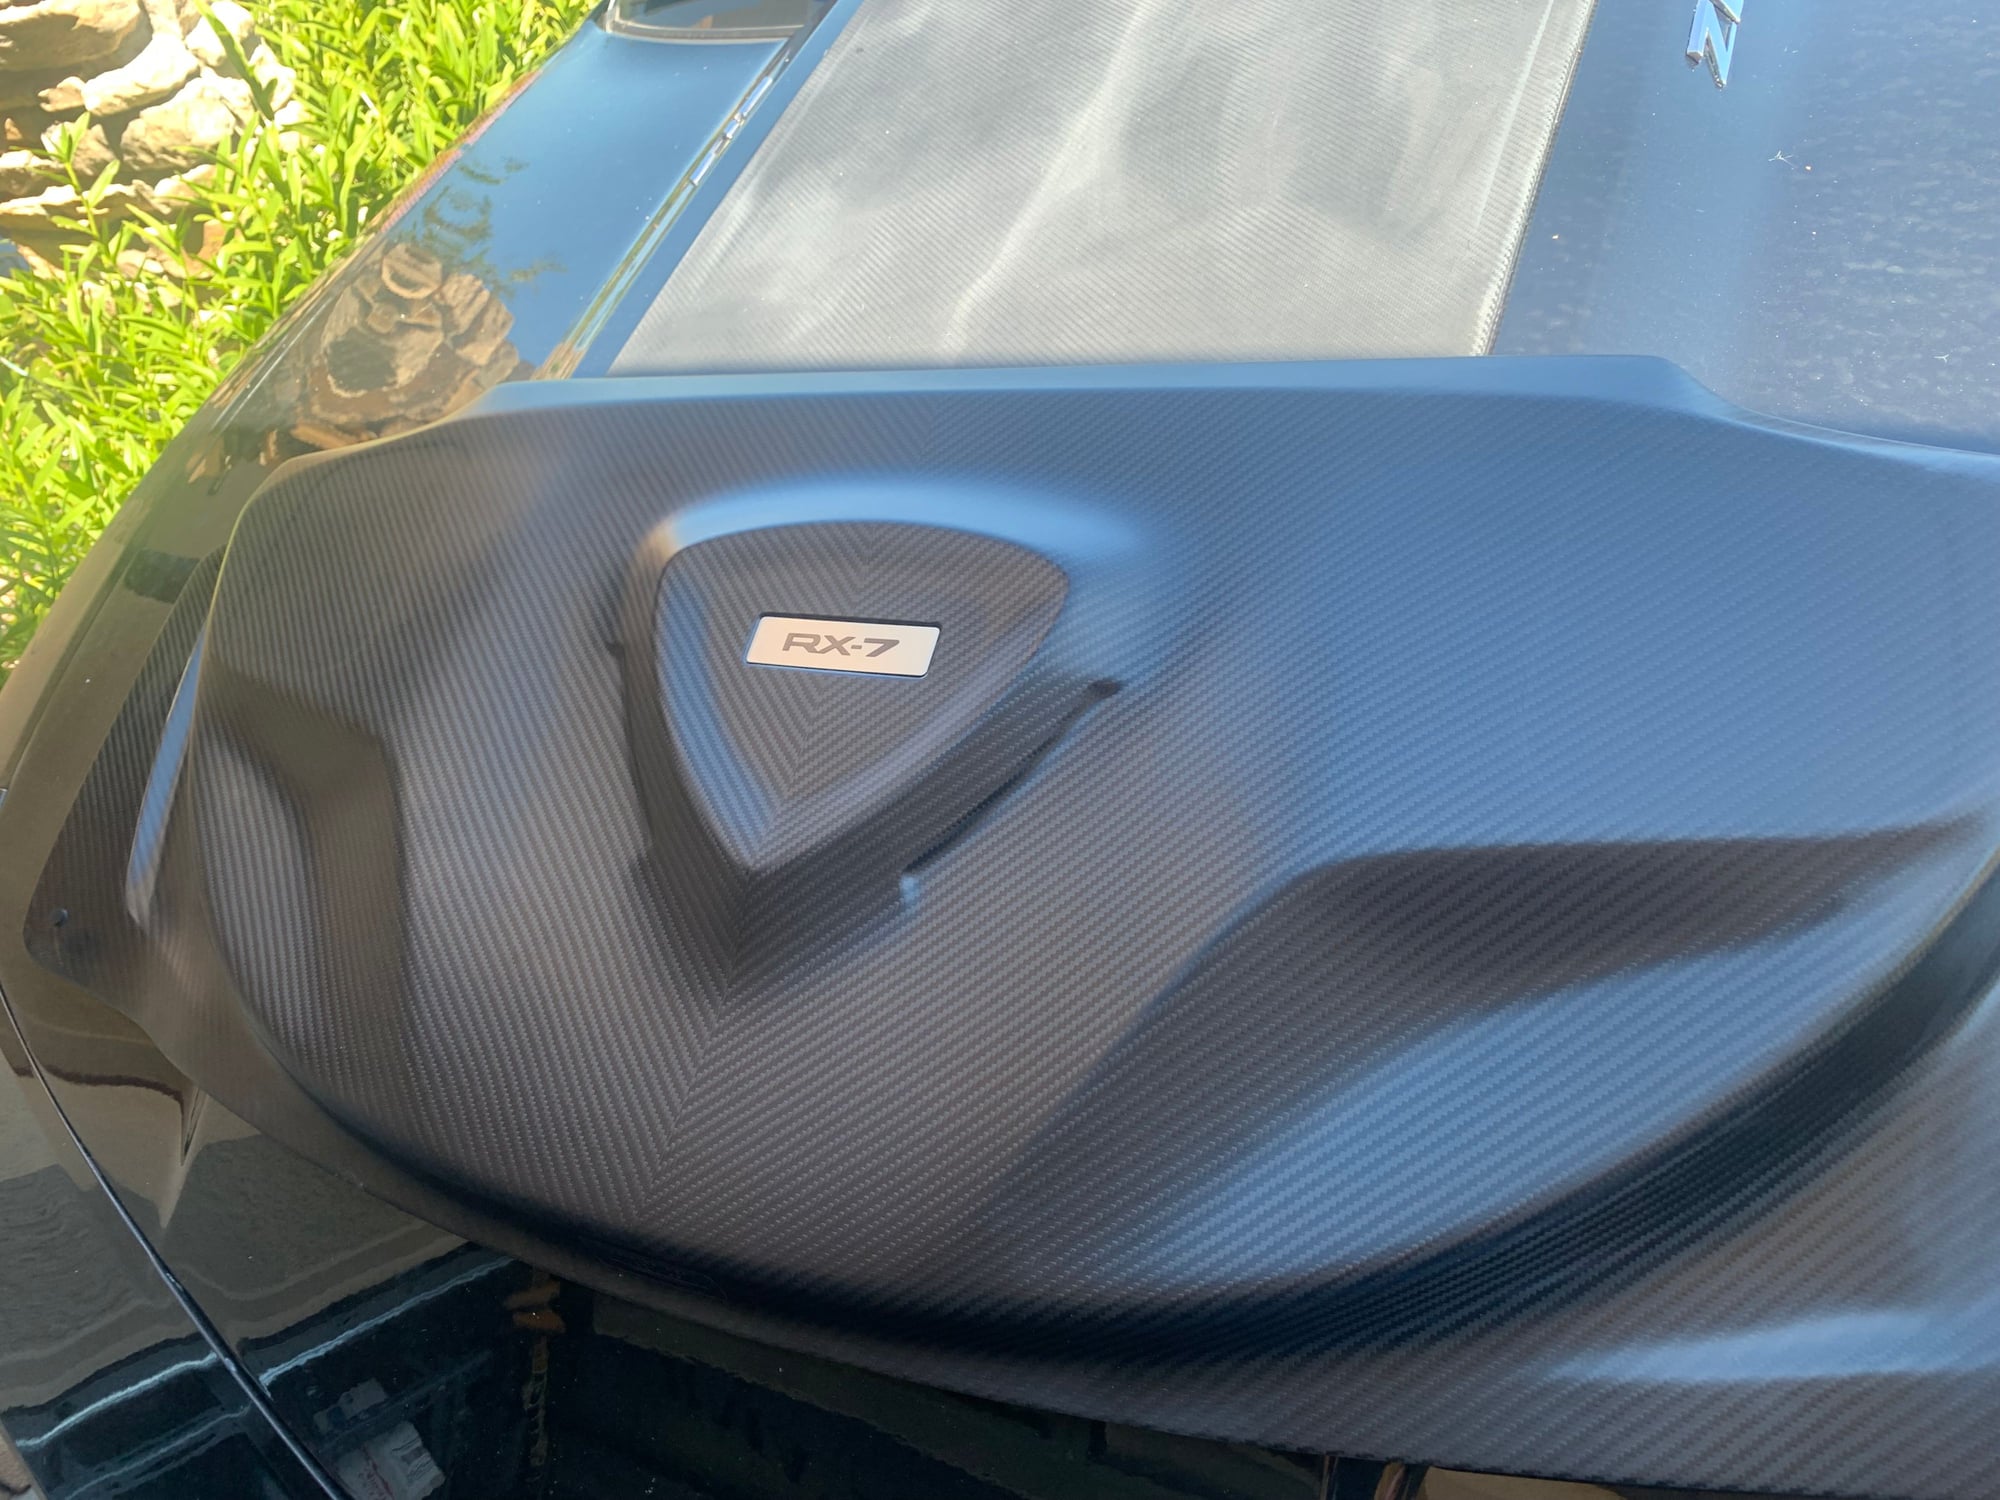 Interior/Upholstery - Carbon Fiber Privacy cover - Used - 1993 to 2002 Mazda RX-7 - Kissimmee, FL 34746, United States